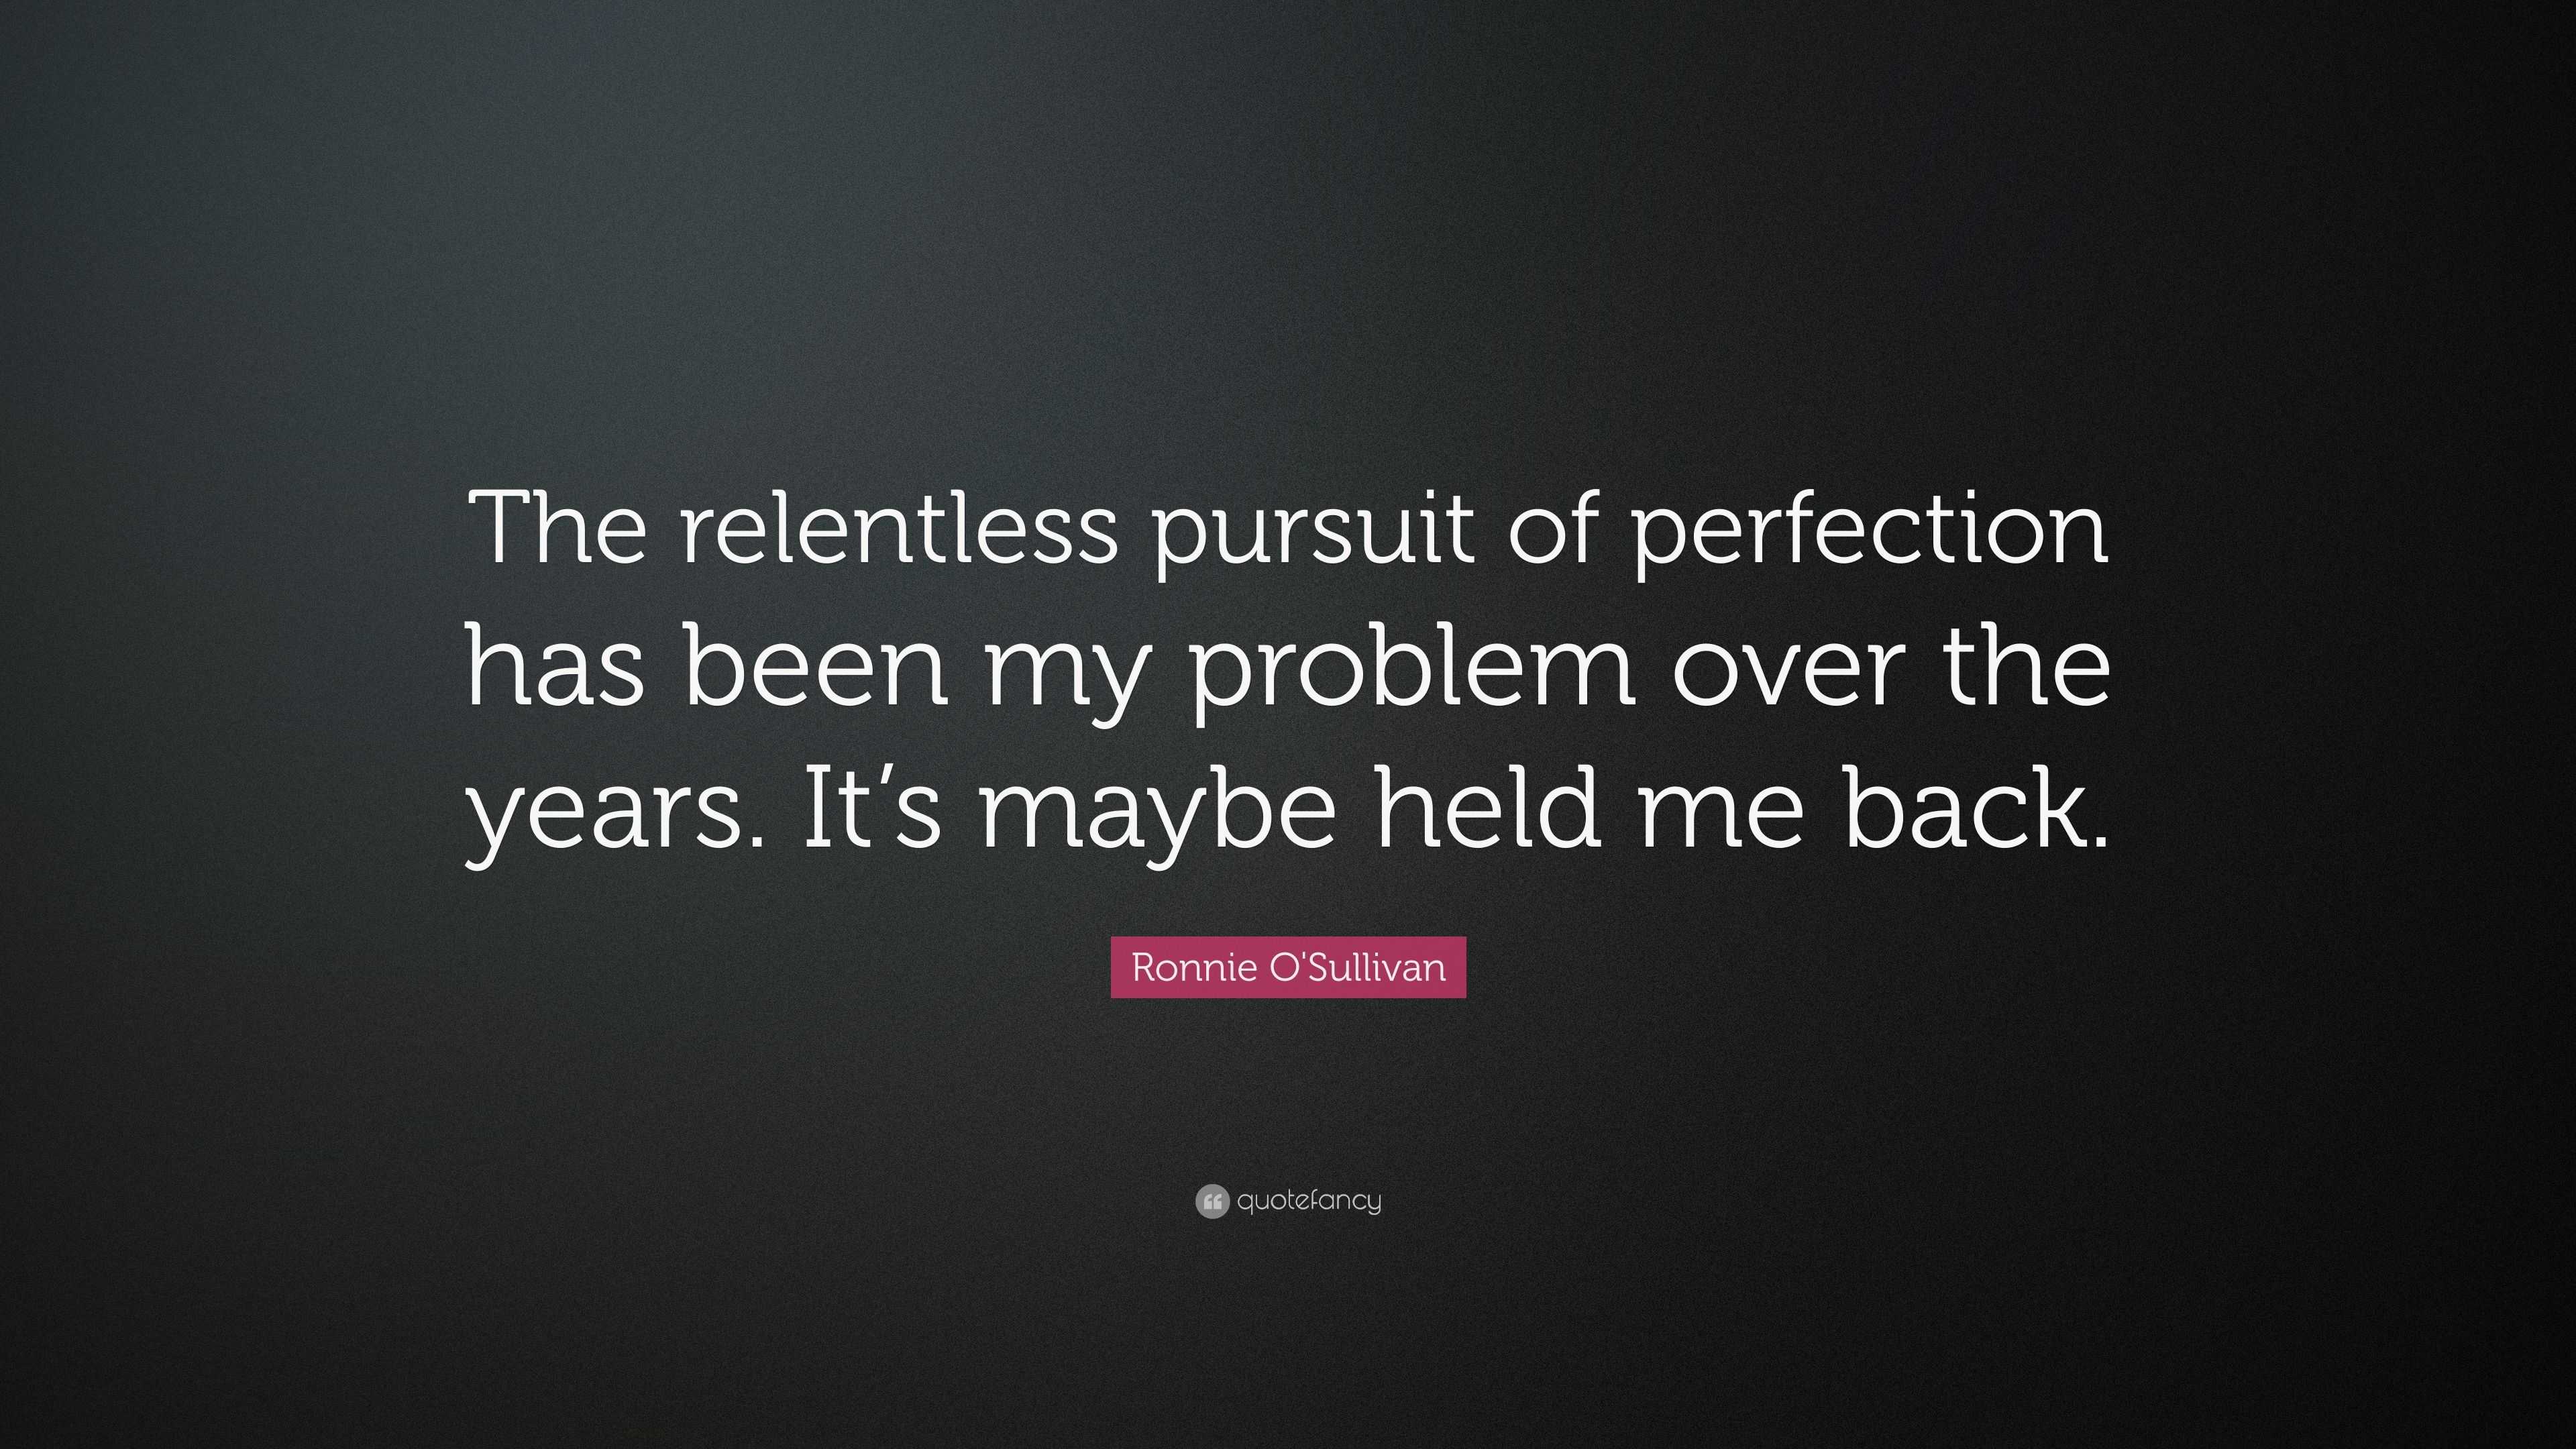 Ronnie O'Sullivan Quote: "The relentless pursuit of perfection has been my problem over the ...